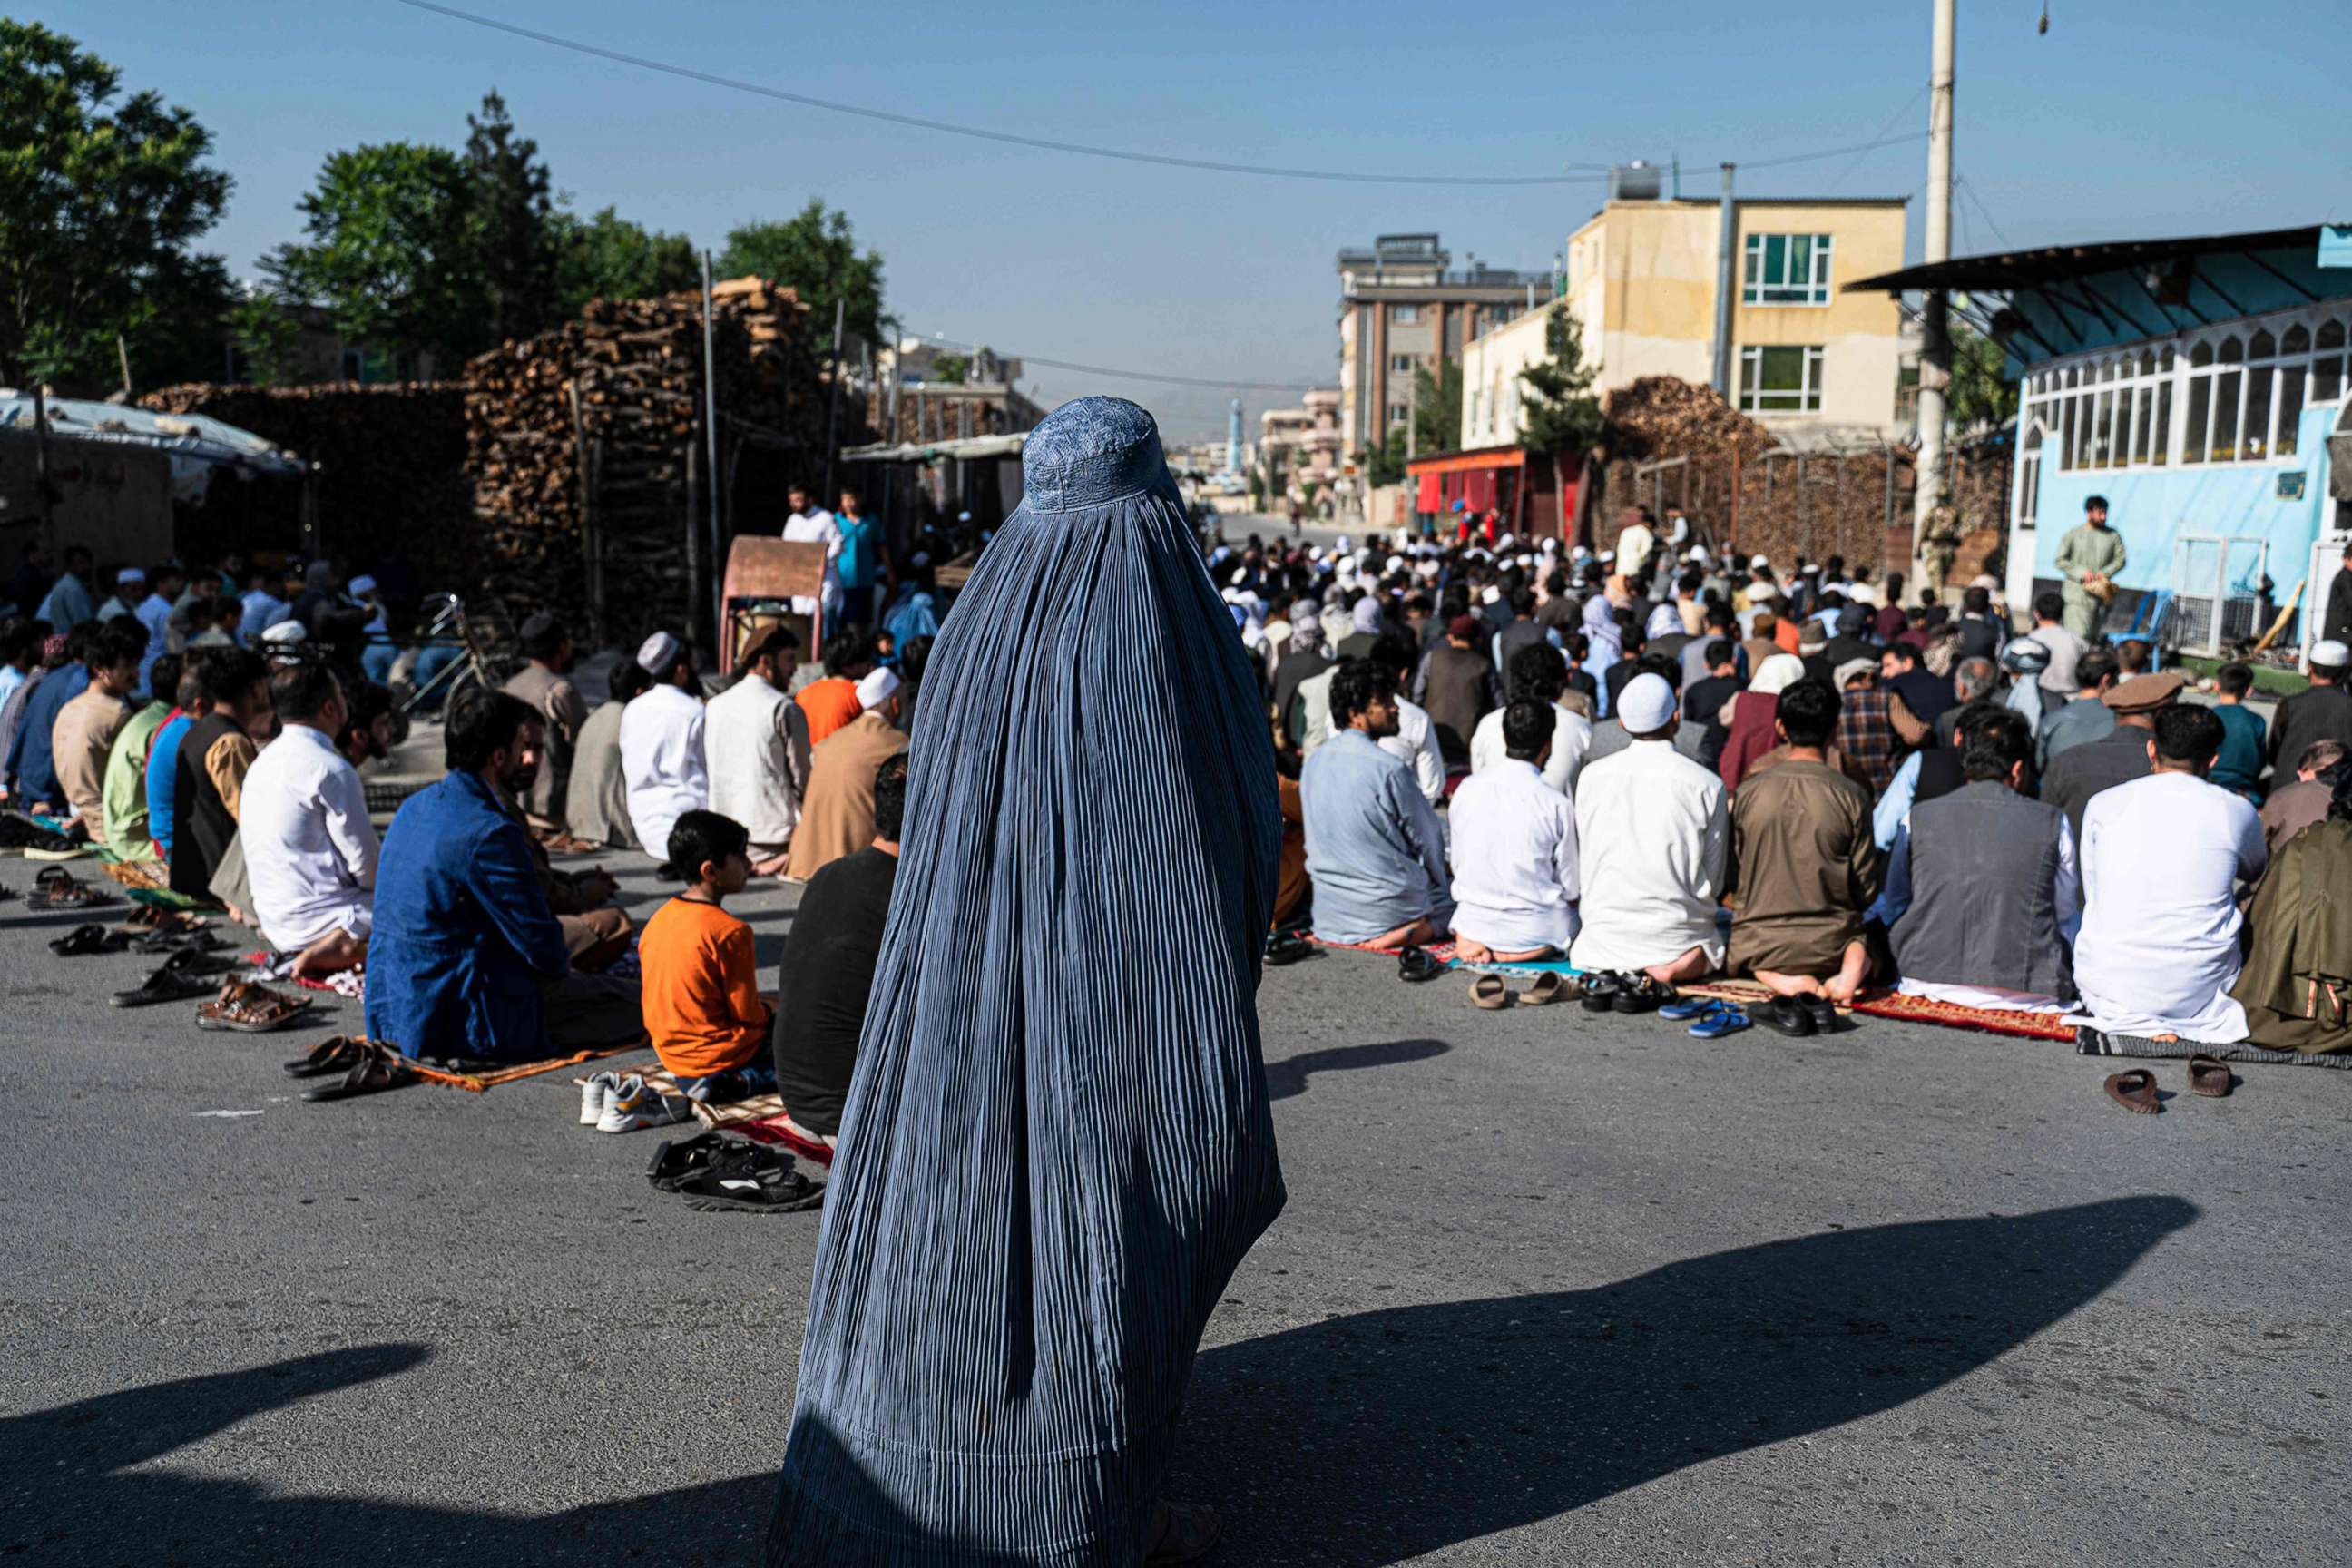 PHOTO: An Afghan burqa-clad woman stands as Muslim devotees offer Eid al-Fitr prayers, which marks the end of the holy fasting month of Ramadan outside a mosque in a street in Kabul, on May 1, 2022.